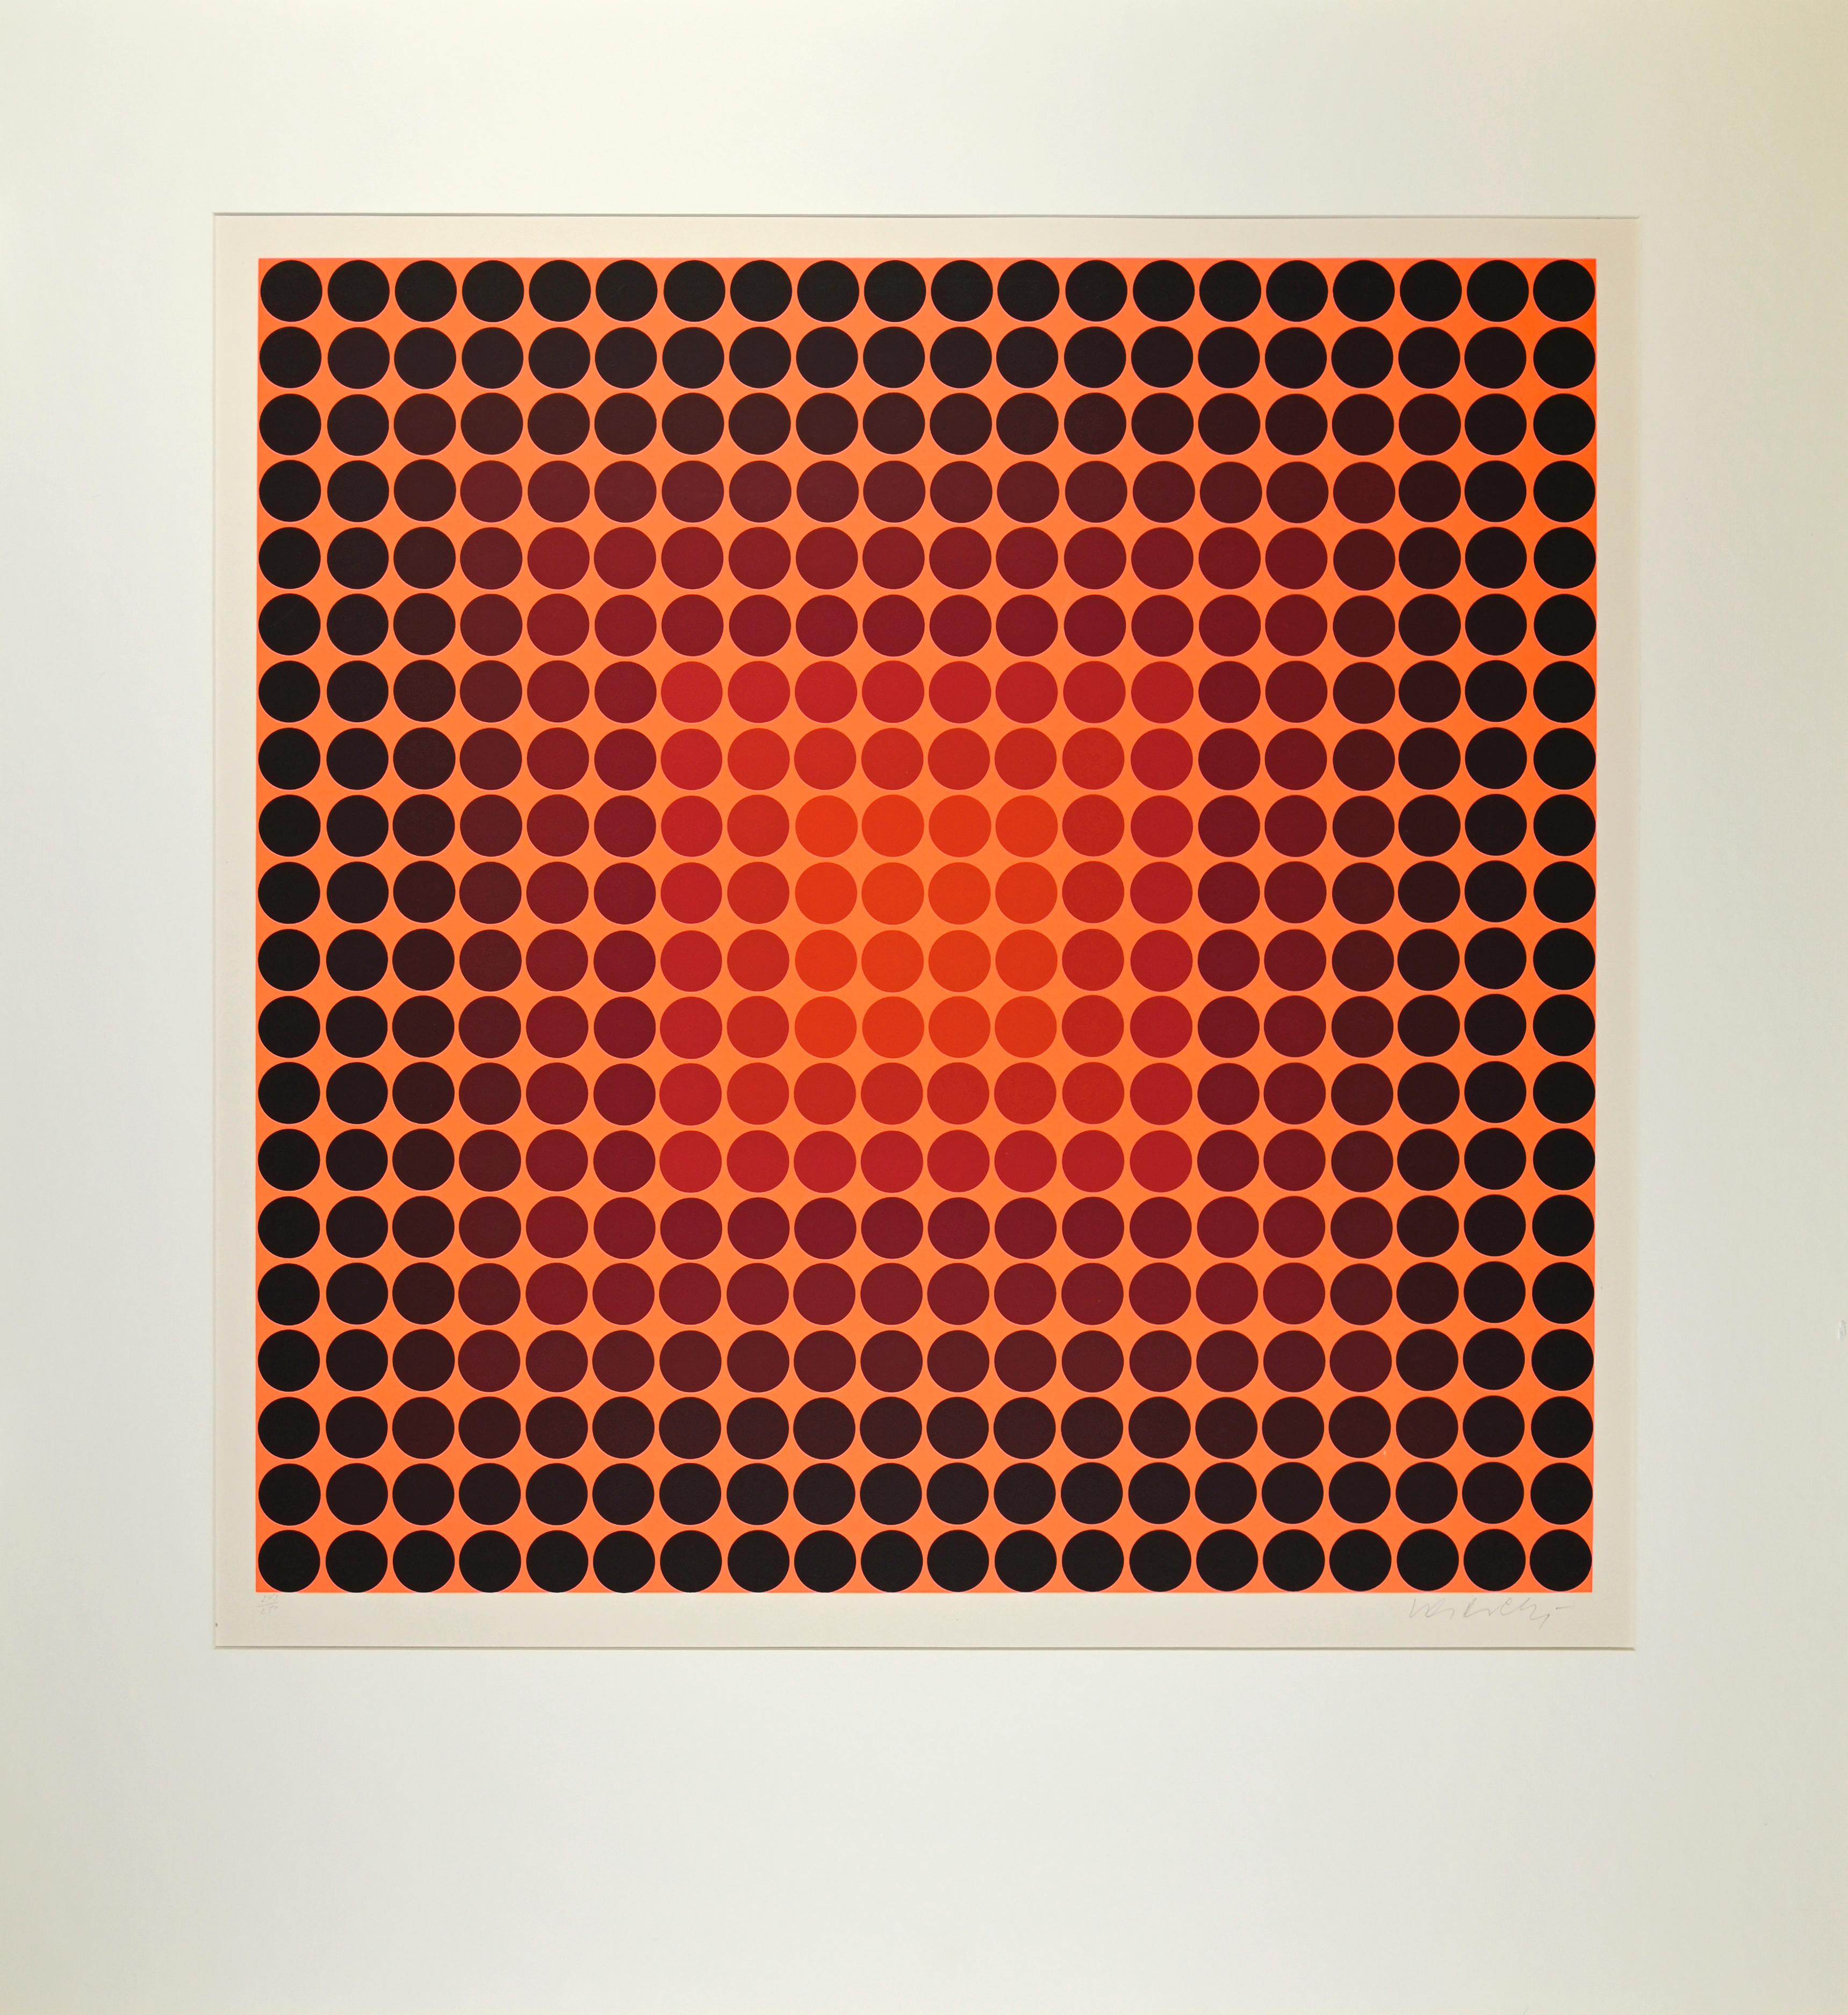 Victor Vasarely Abstract Print - Black Dots on Orange - Screen Print by V. Vasarely - 1965